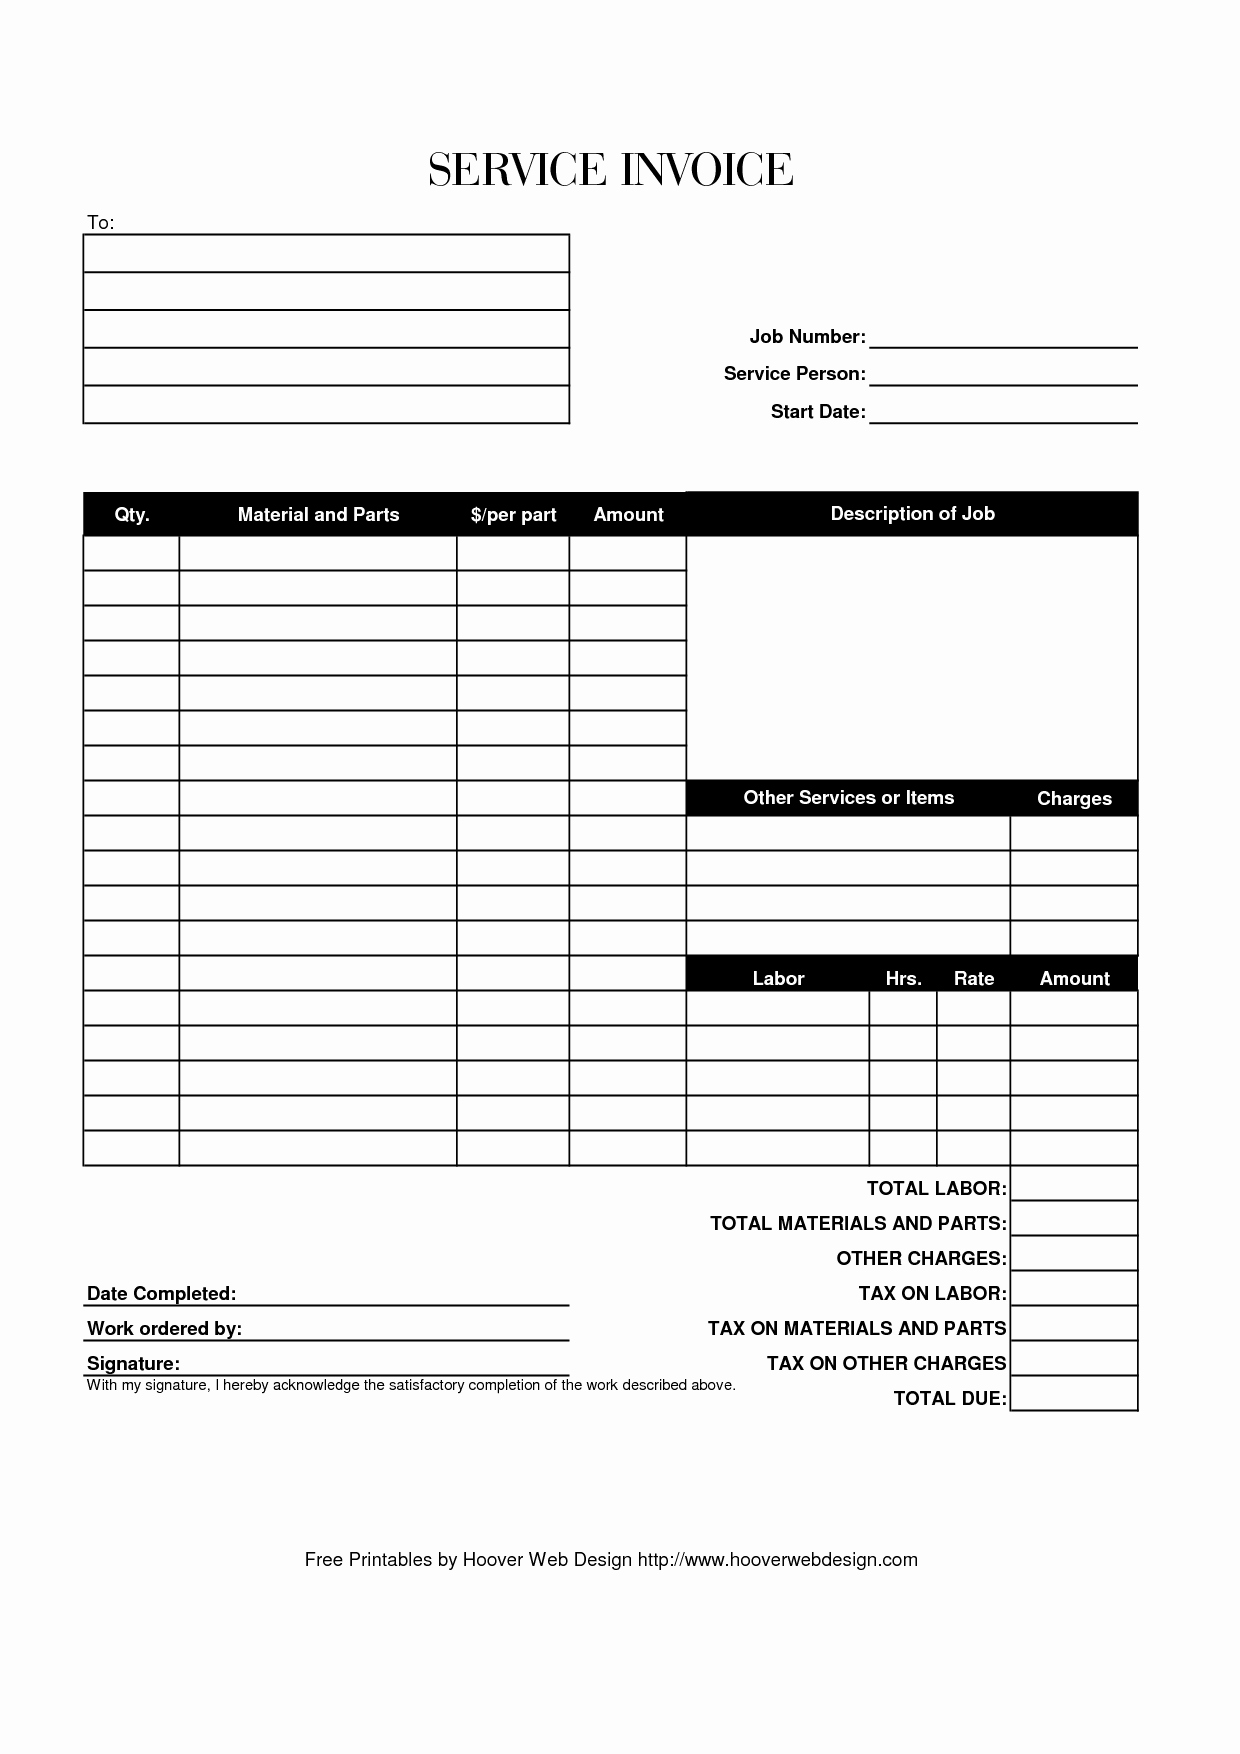 Free Service Invoice Template Download Awesome Printable Blank Service Billing Invoice Template Example